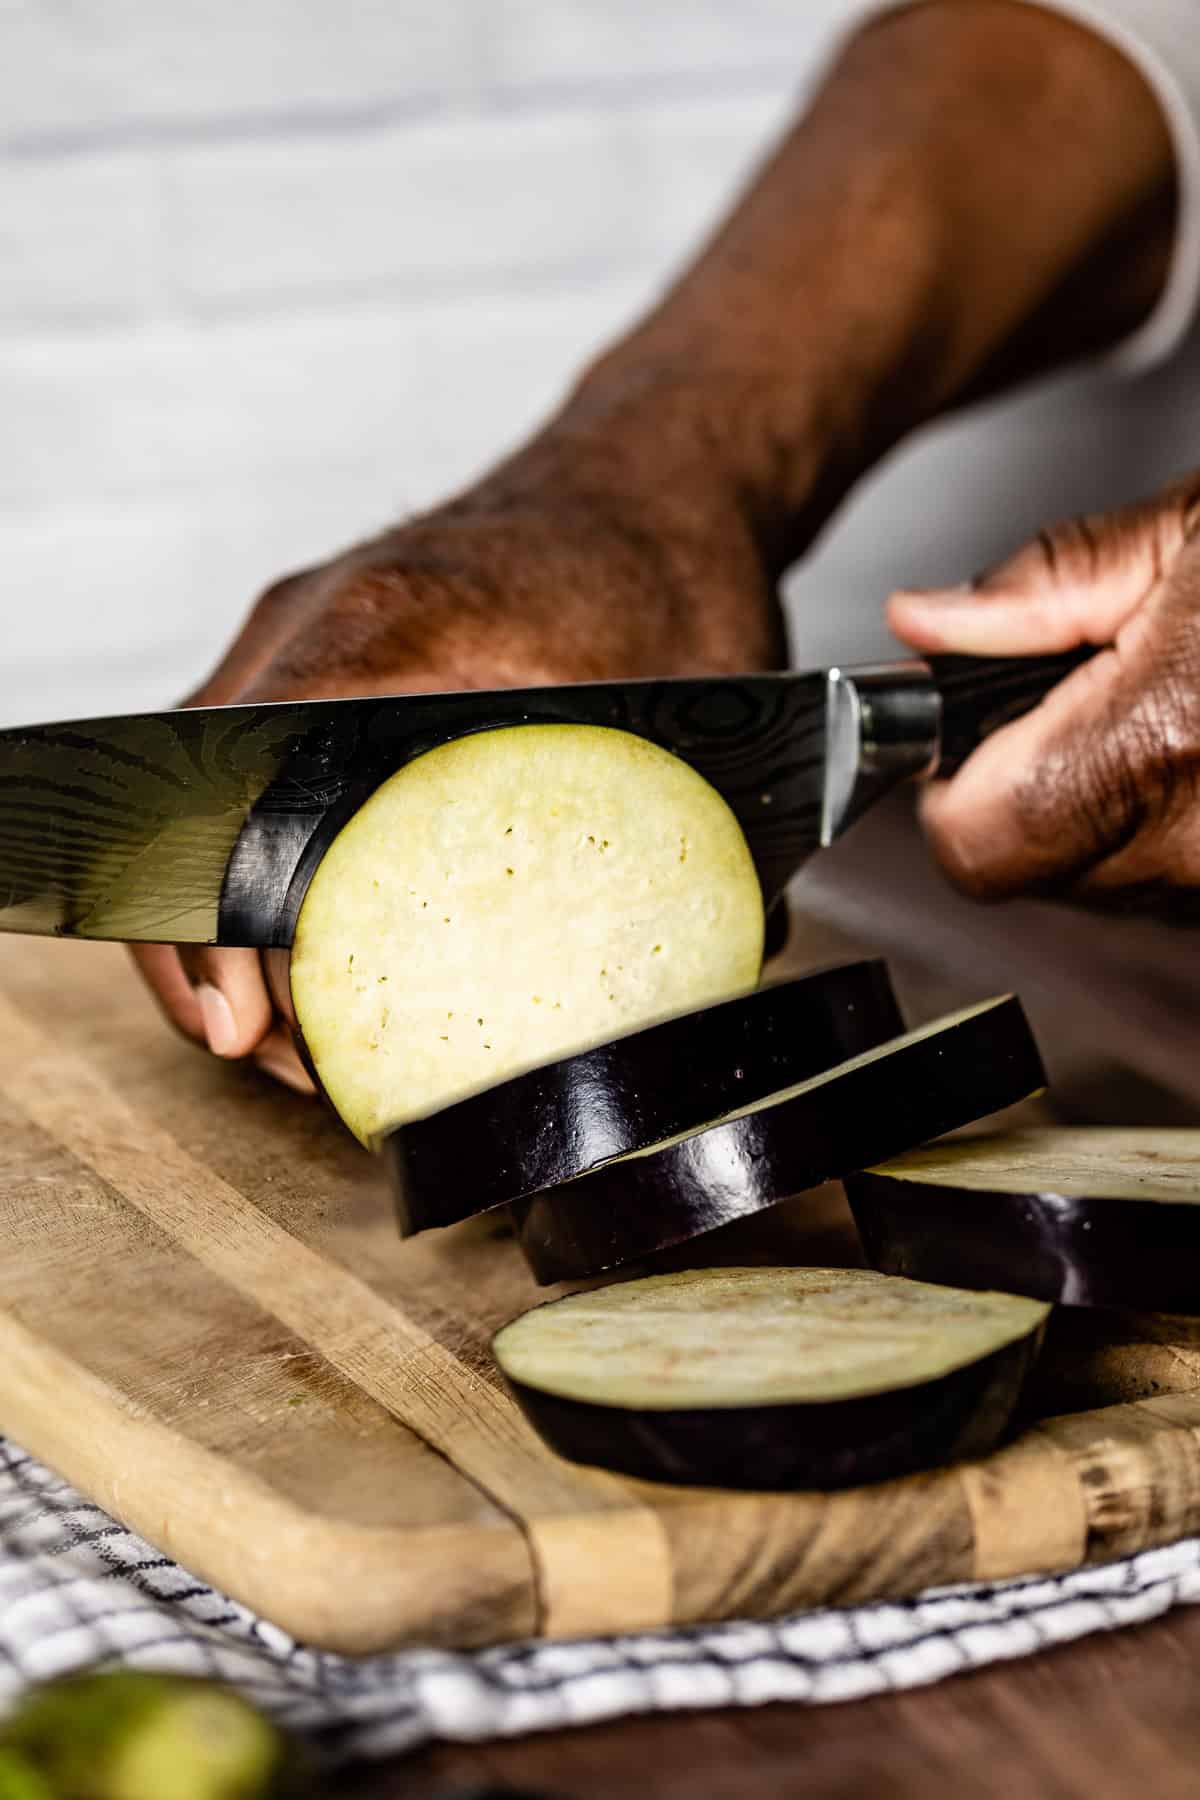 A person cutting an eggplant into rounds shown from the side view.